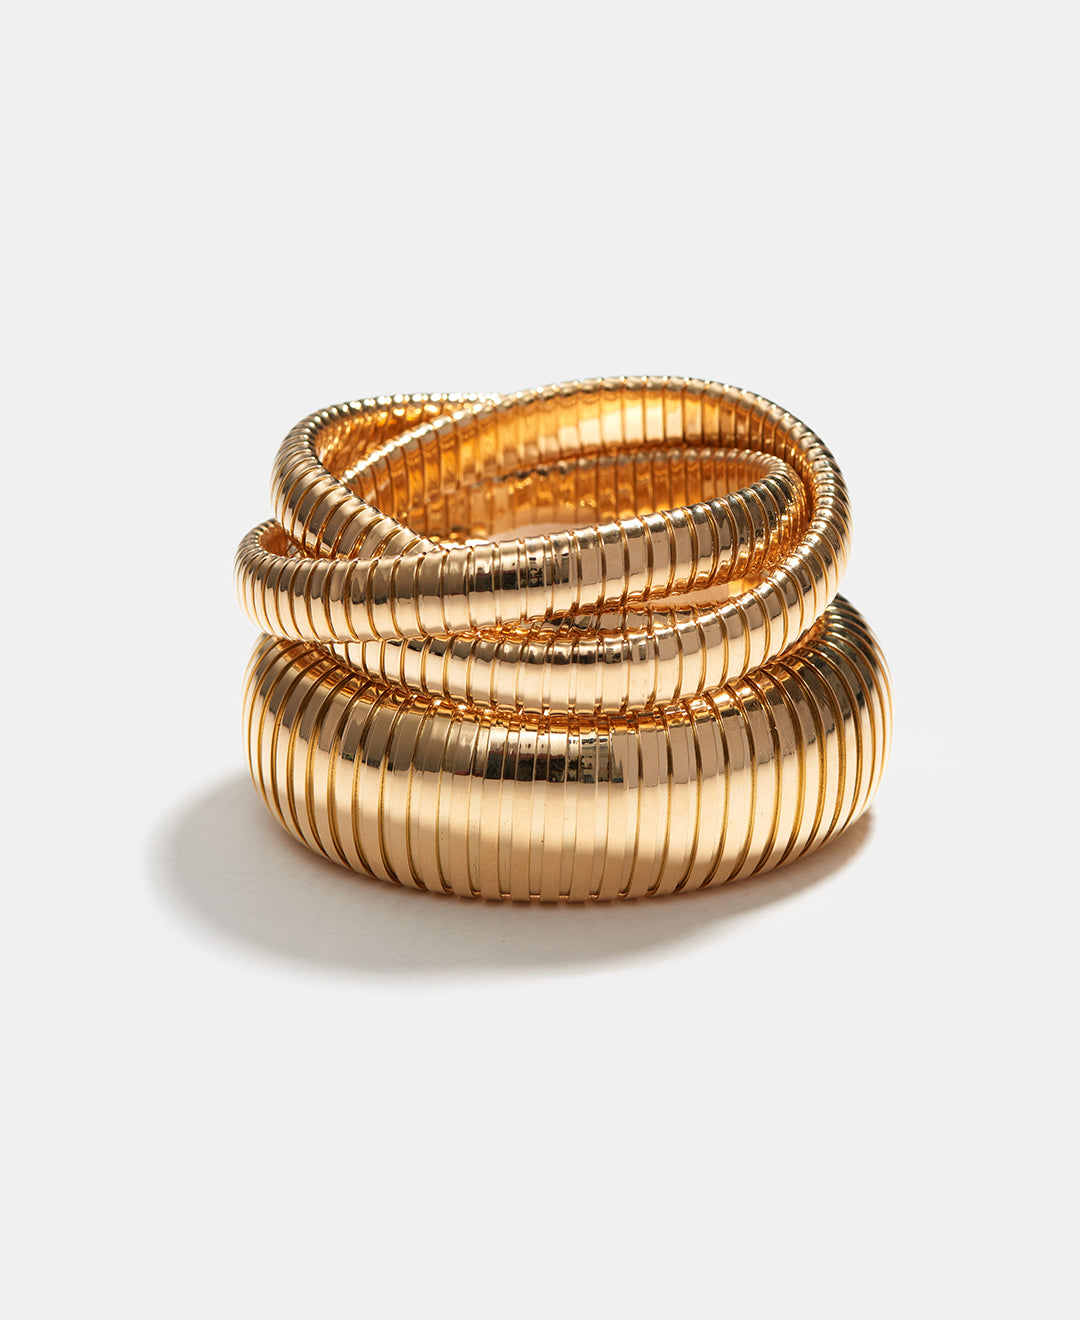 A yellow gold Rolling Bracelet stacked on top of a yellow gold Domed Cuff on a white background.